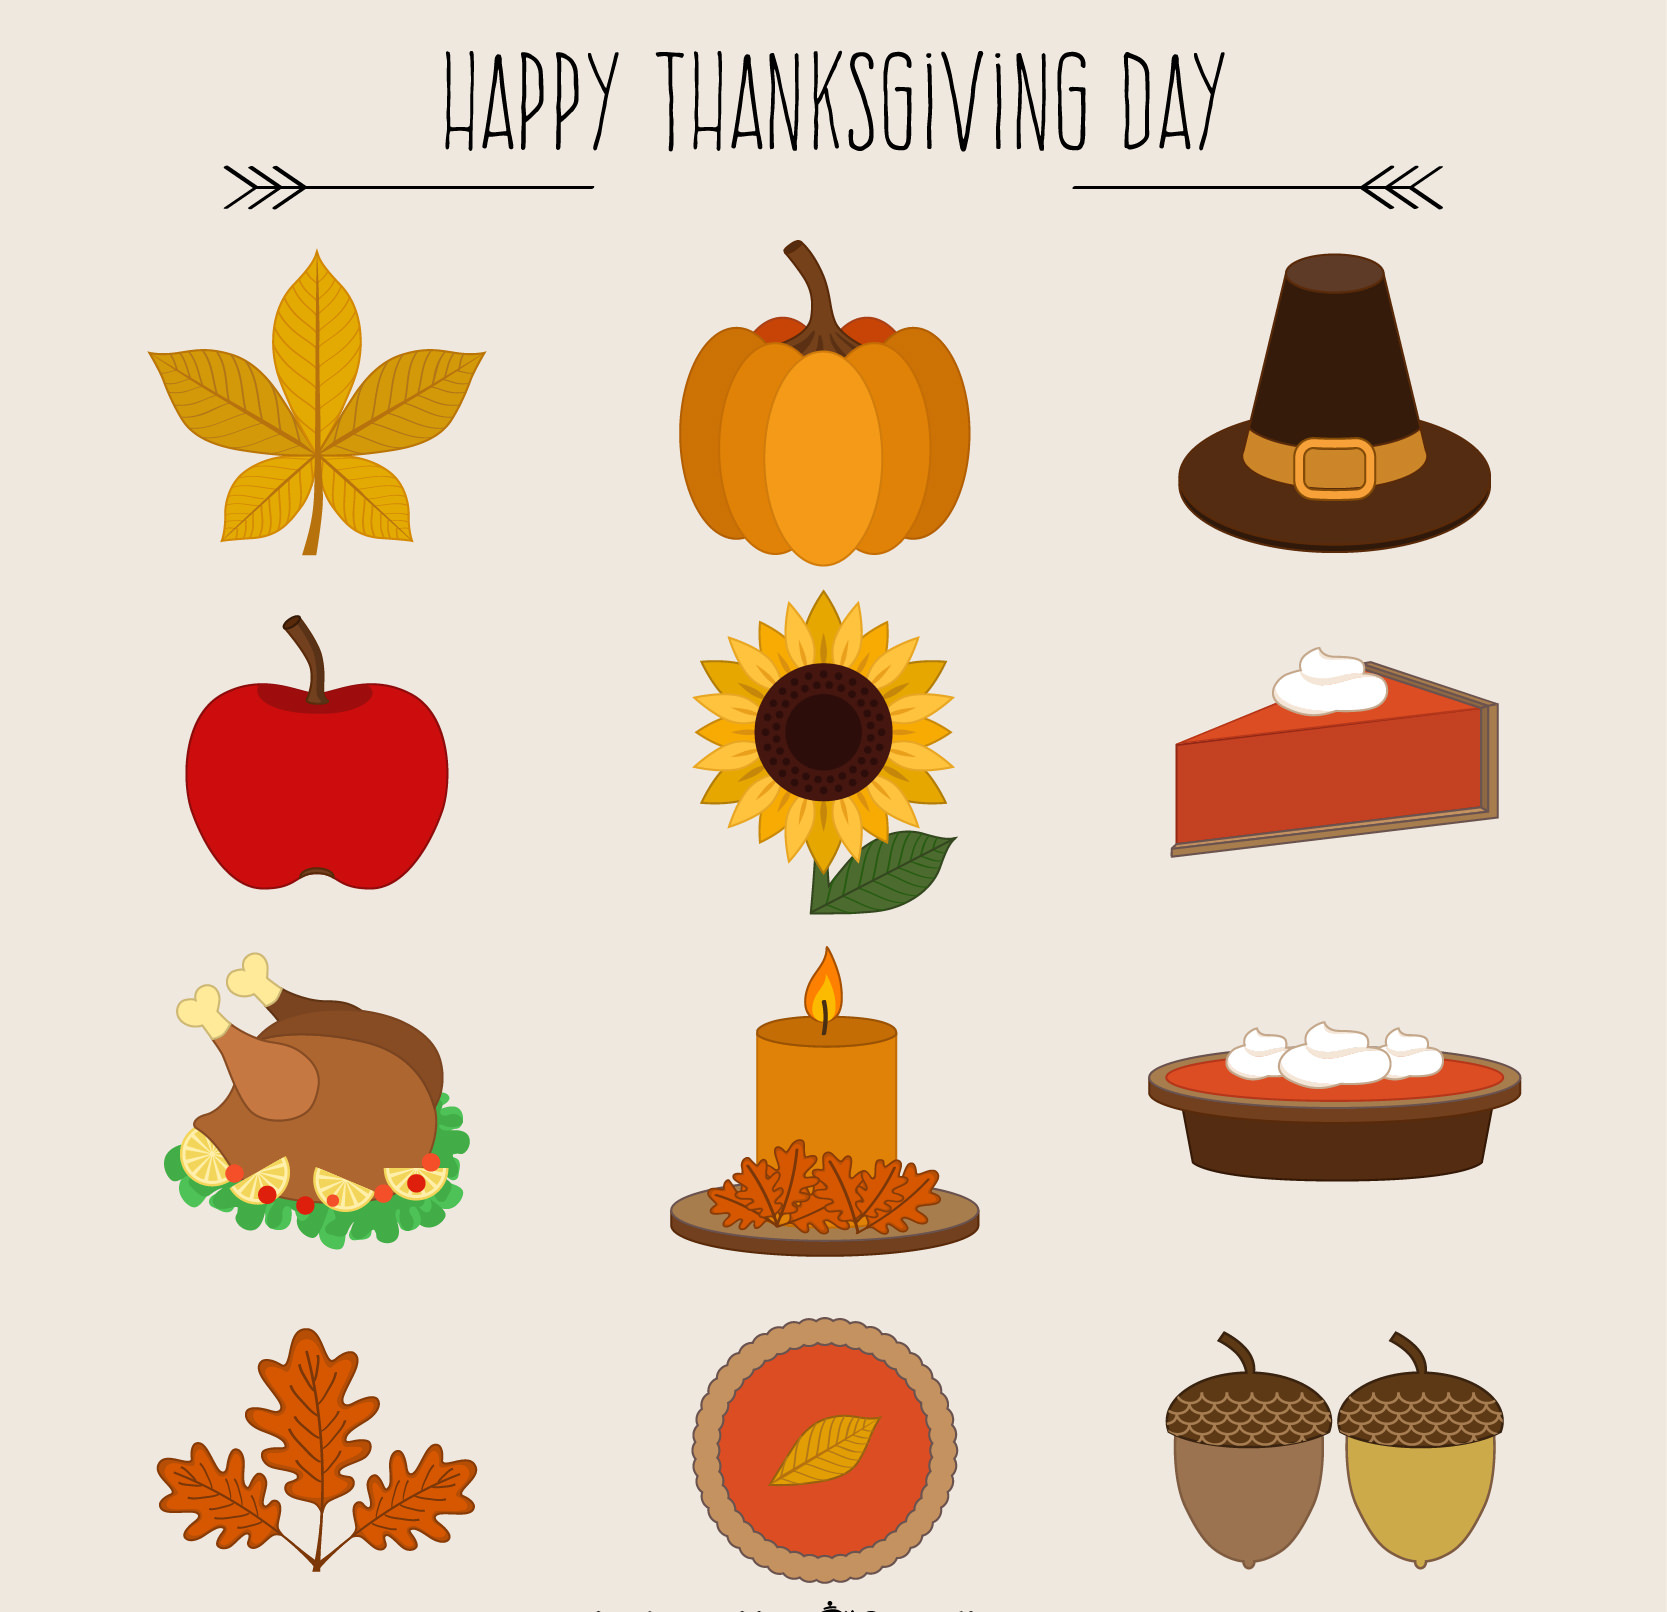 MY THANKSGIVING ICON - Polyvore